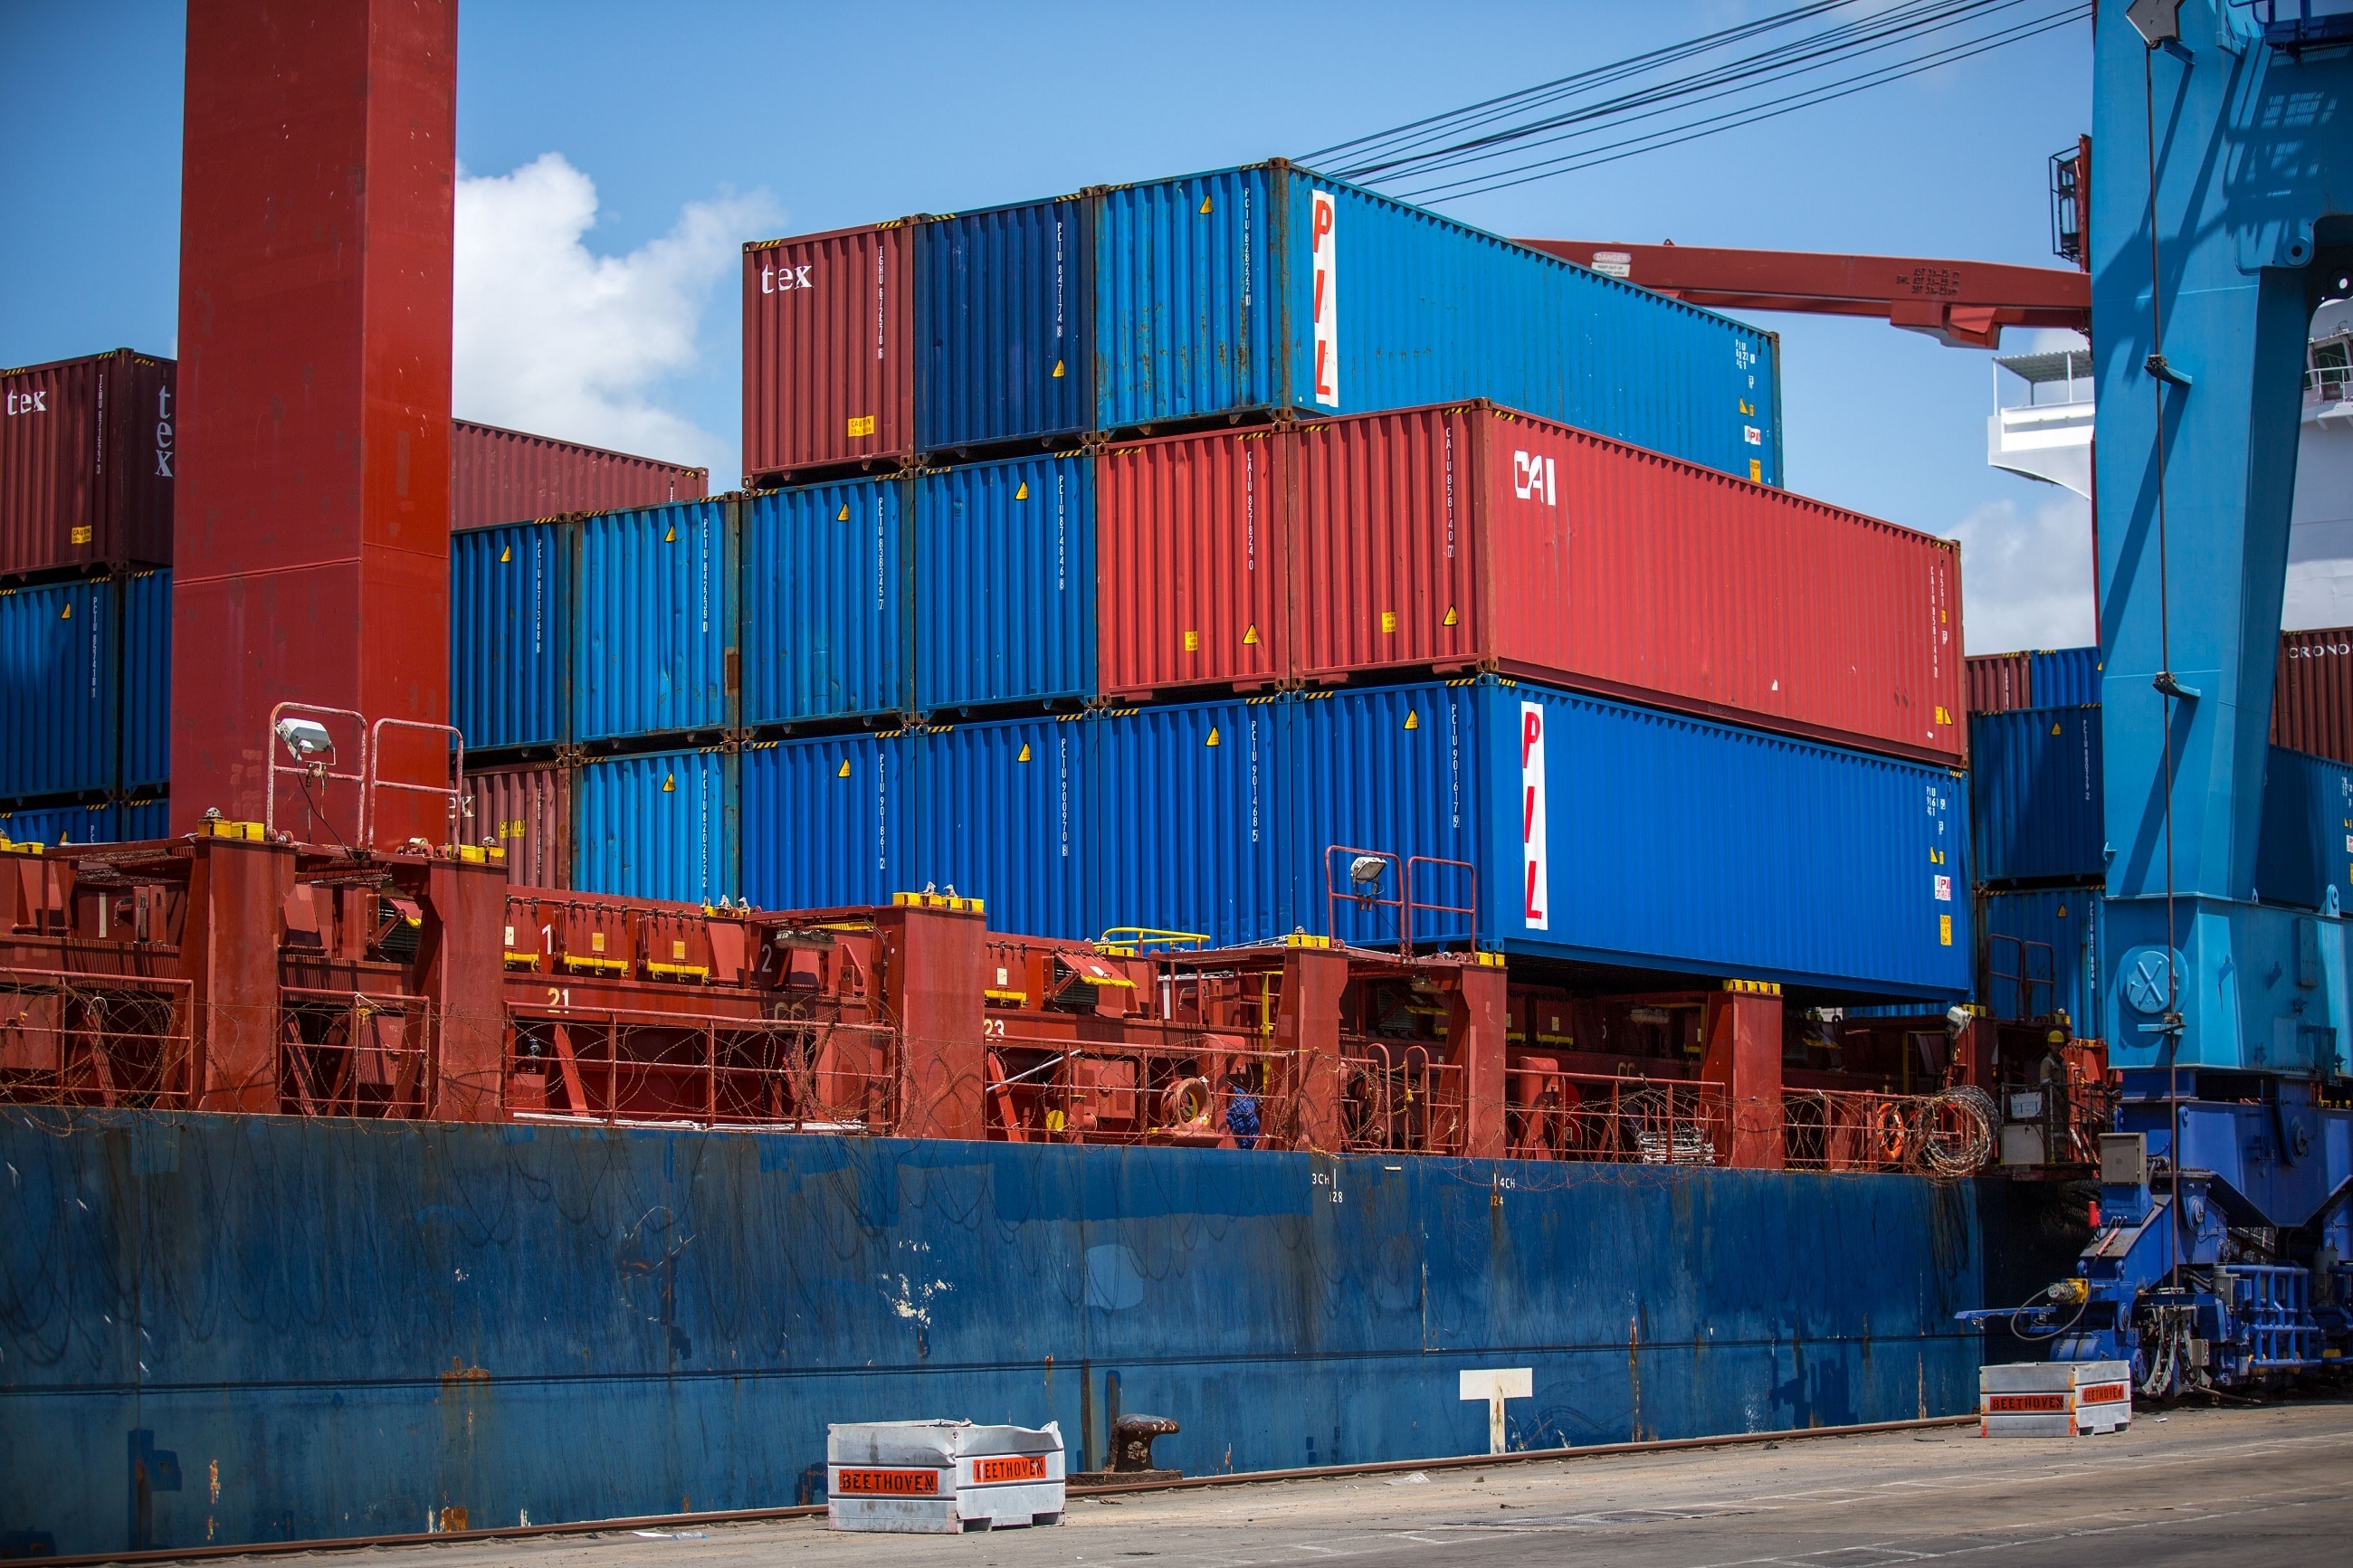 red and blue intermodal containers pile